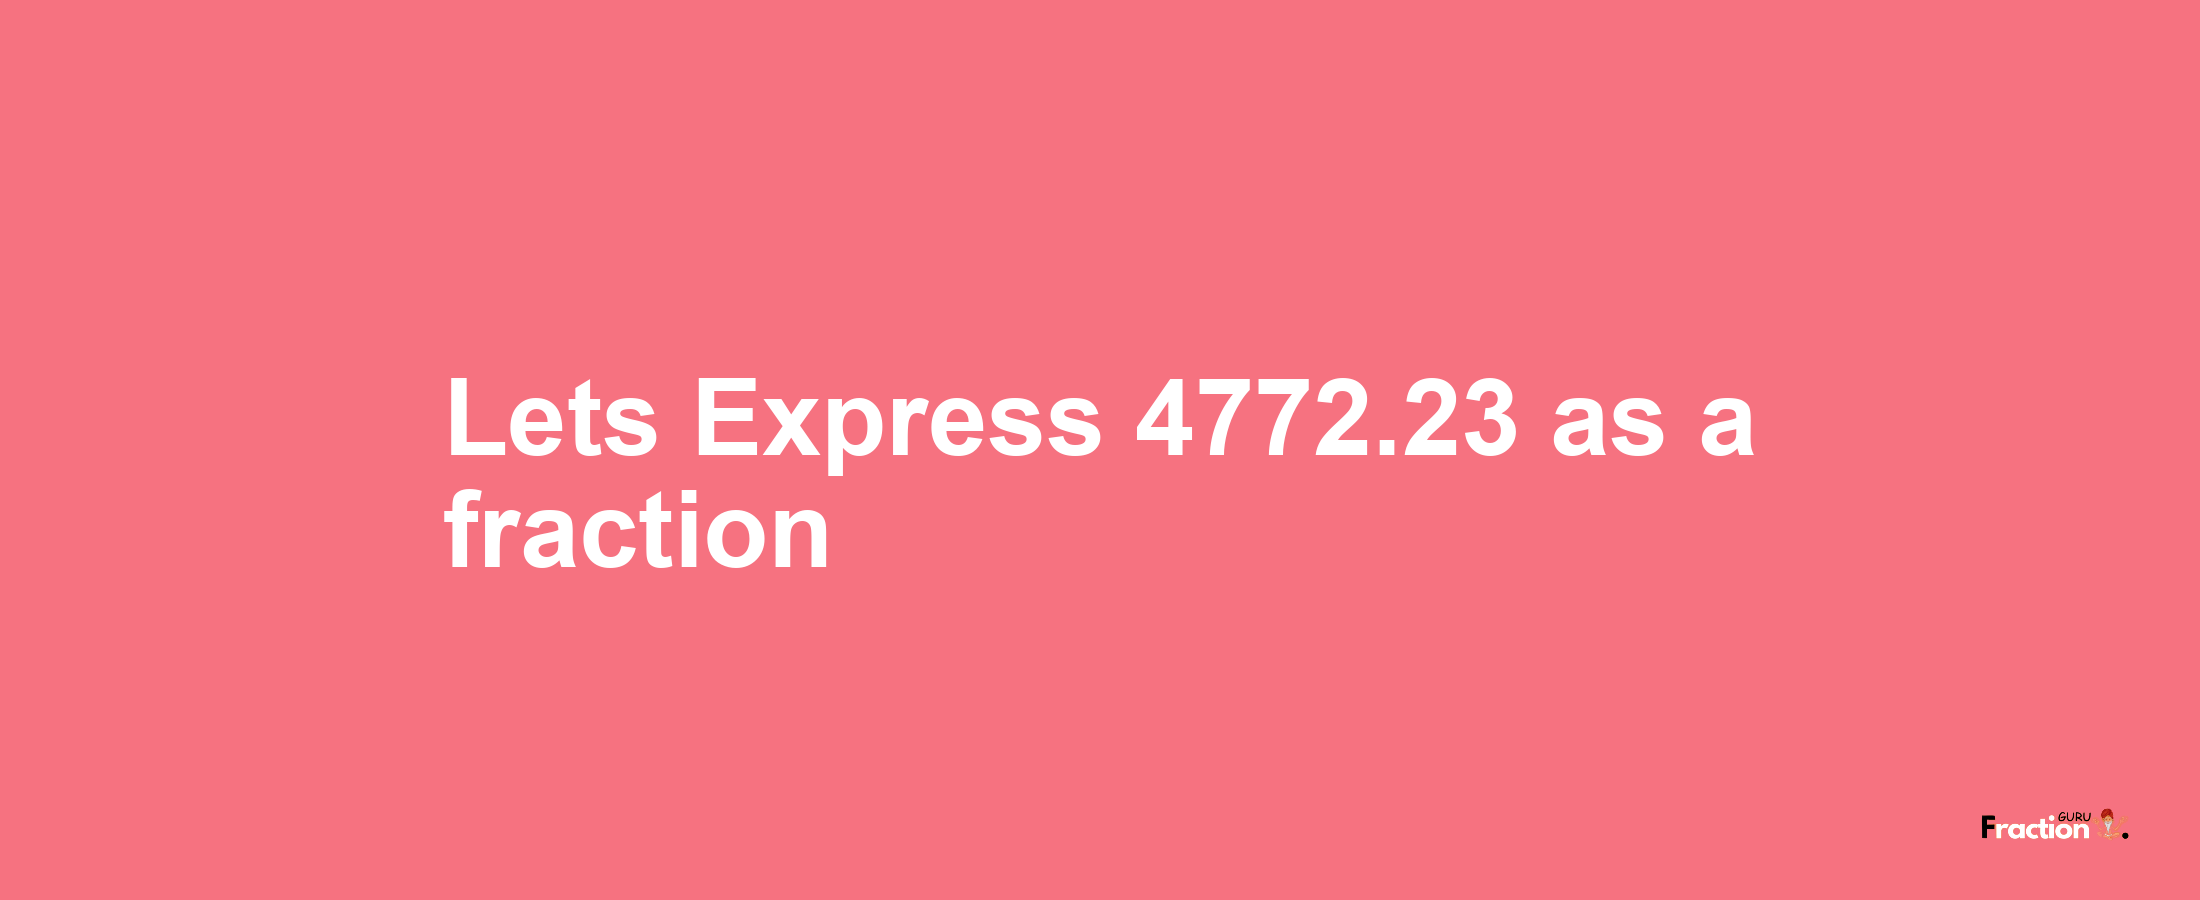 Lets Express 4772.23 as afraction